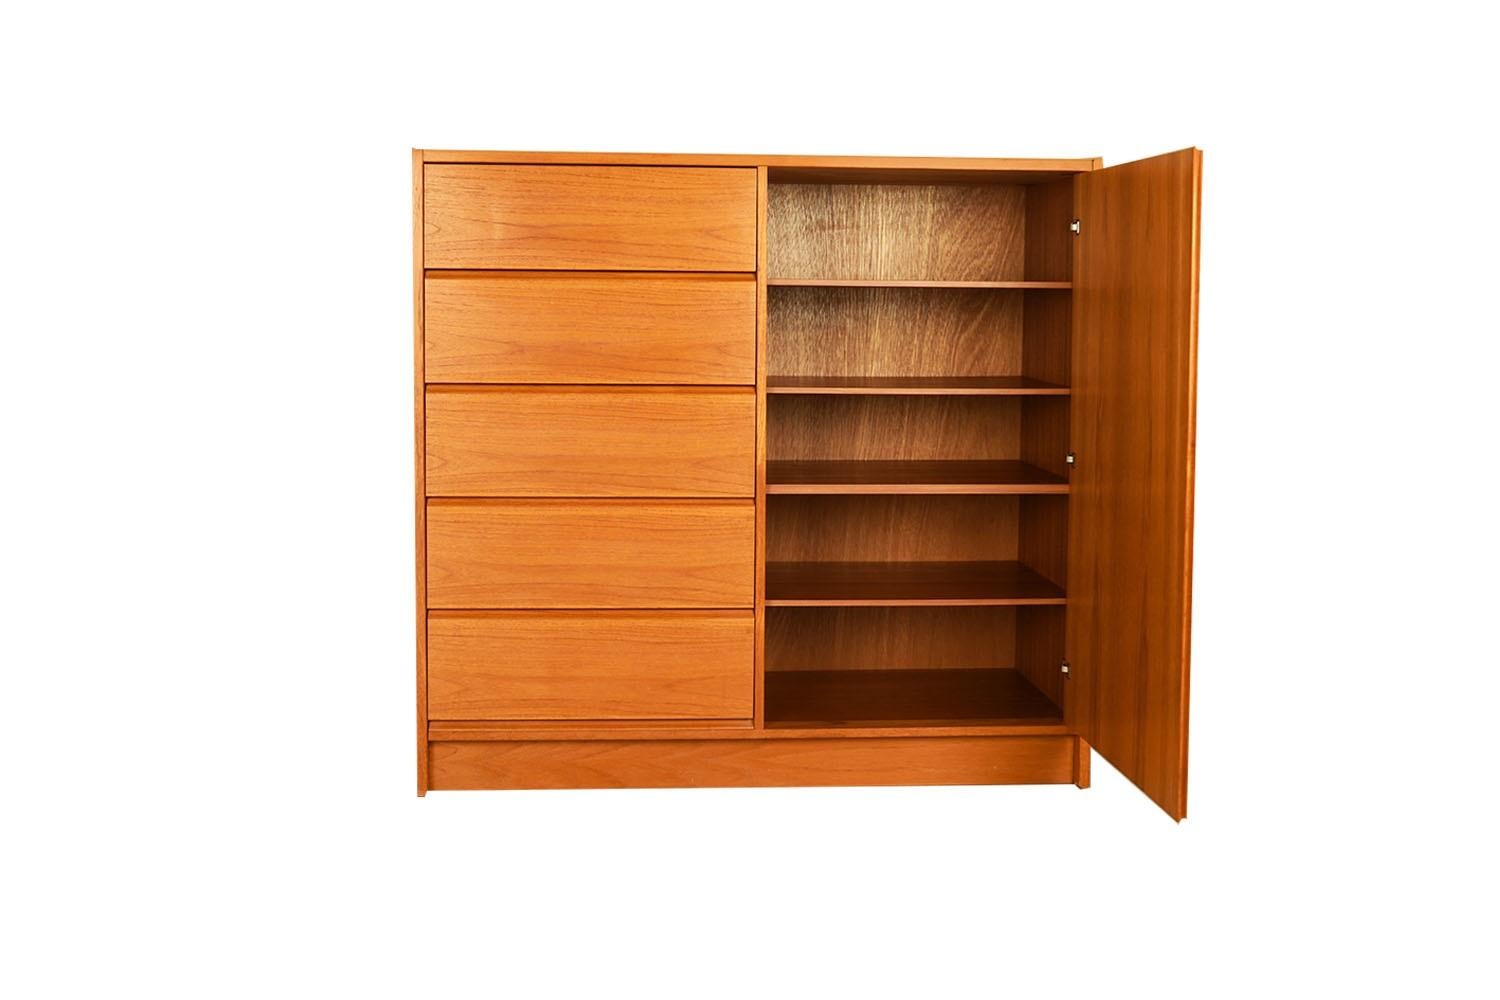 Beautiful mid-century modern highboy, gentleman’s tall dresser, wardrobe, circa 1970’s. Don’t be fooled by the term “Gentleman’s Chest” – this high functioning storage piece is really gender neutral, with plenty of storage making it well-suited as a